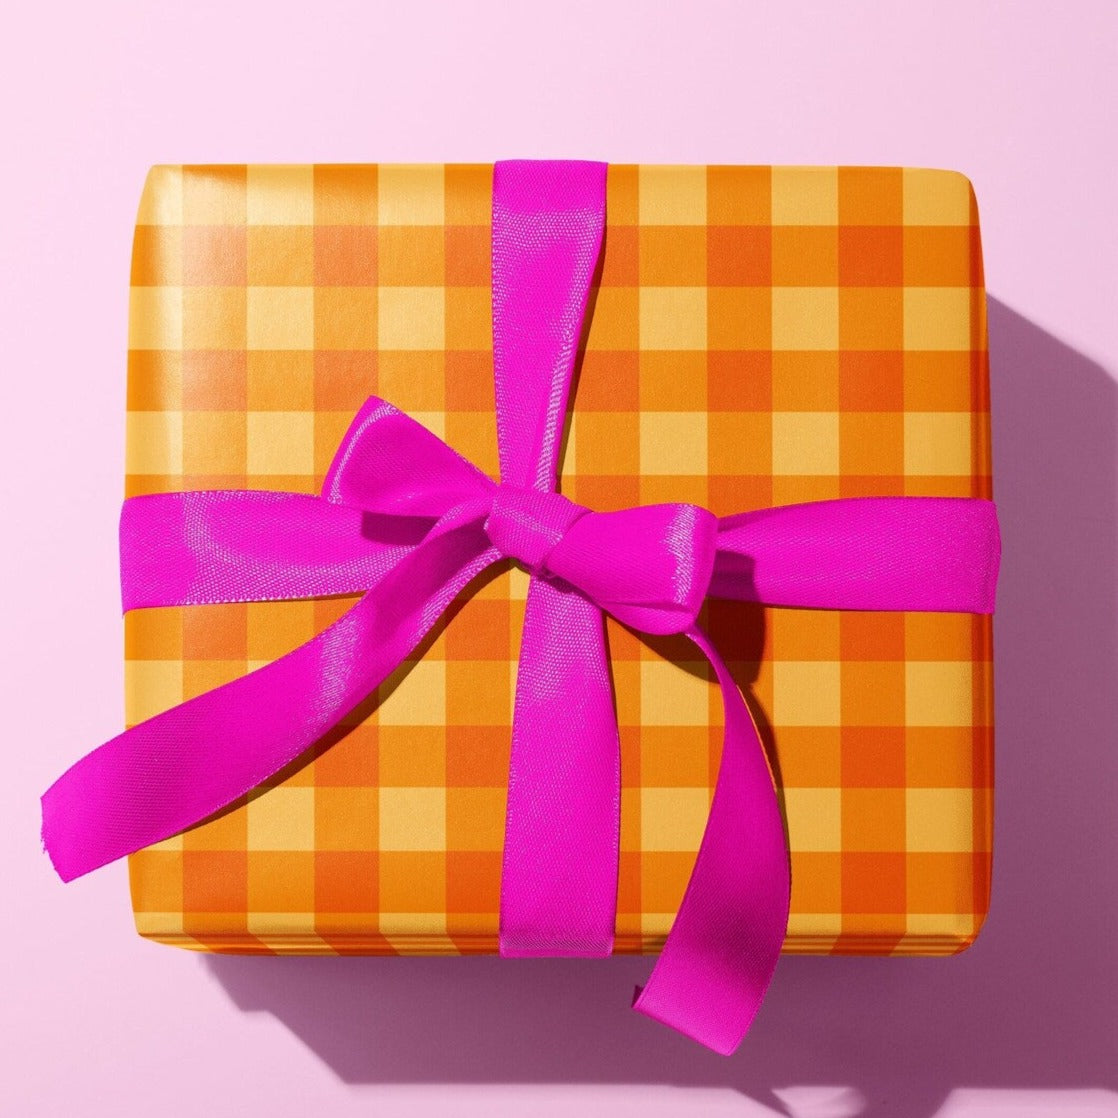 Sprinkle Club - A gift wrapped in a cute orange gingham pattern wrapping paper and pink ribbon